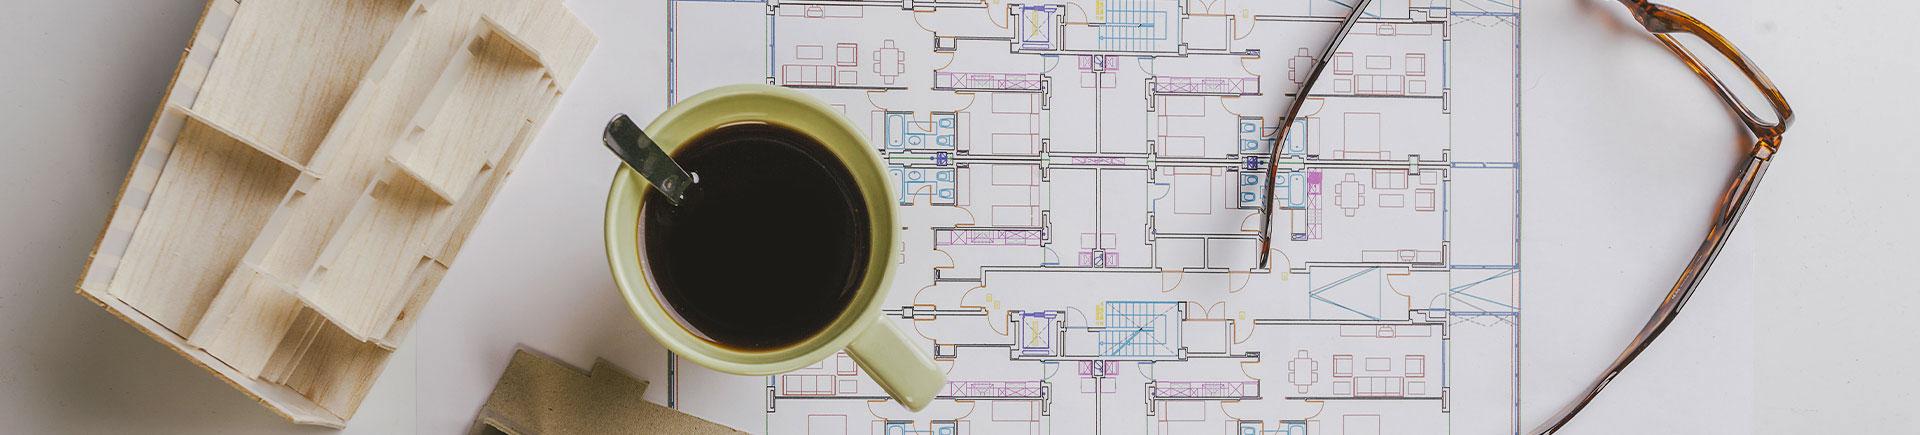 Architects Richmond Coffee and Plans